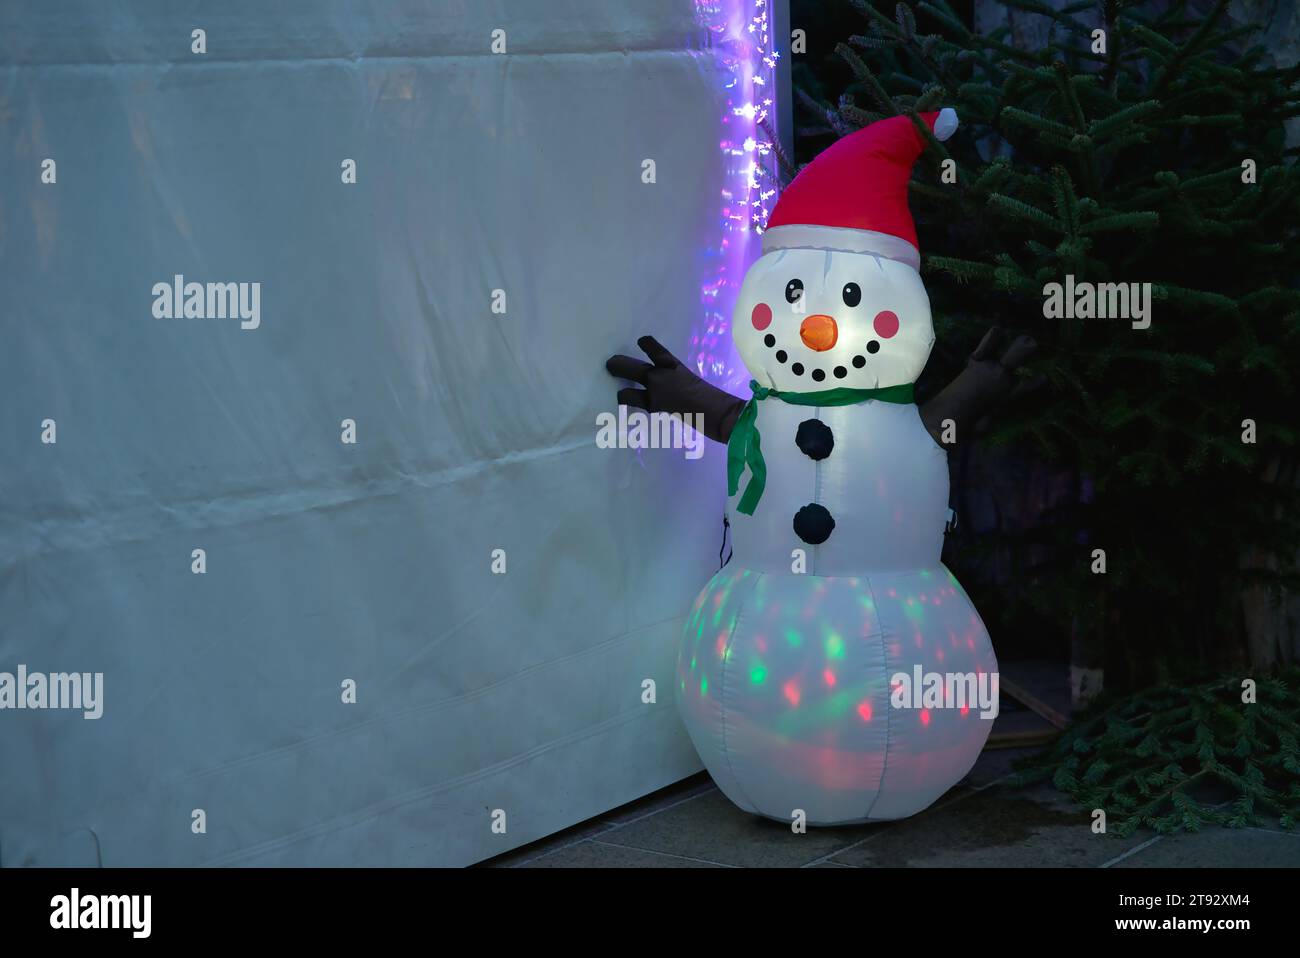 Embrace the whimsy of an inflatable snowman adorned with a red Christmas hat, internally illuminated by vibrant LED lights. With a friendly, smiling f Stock Photo